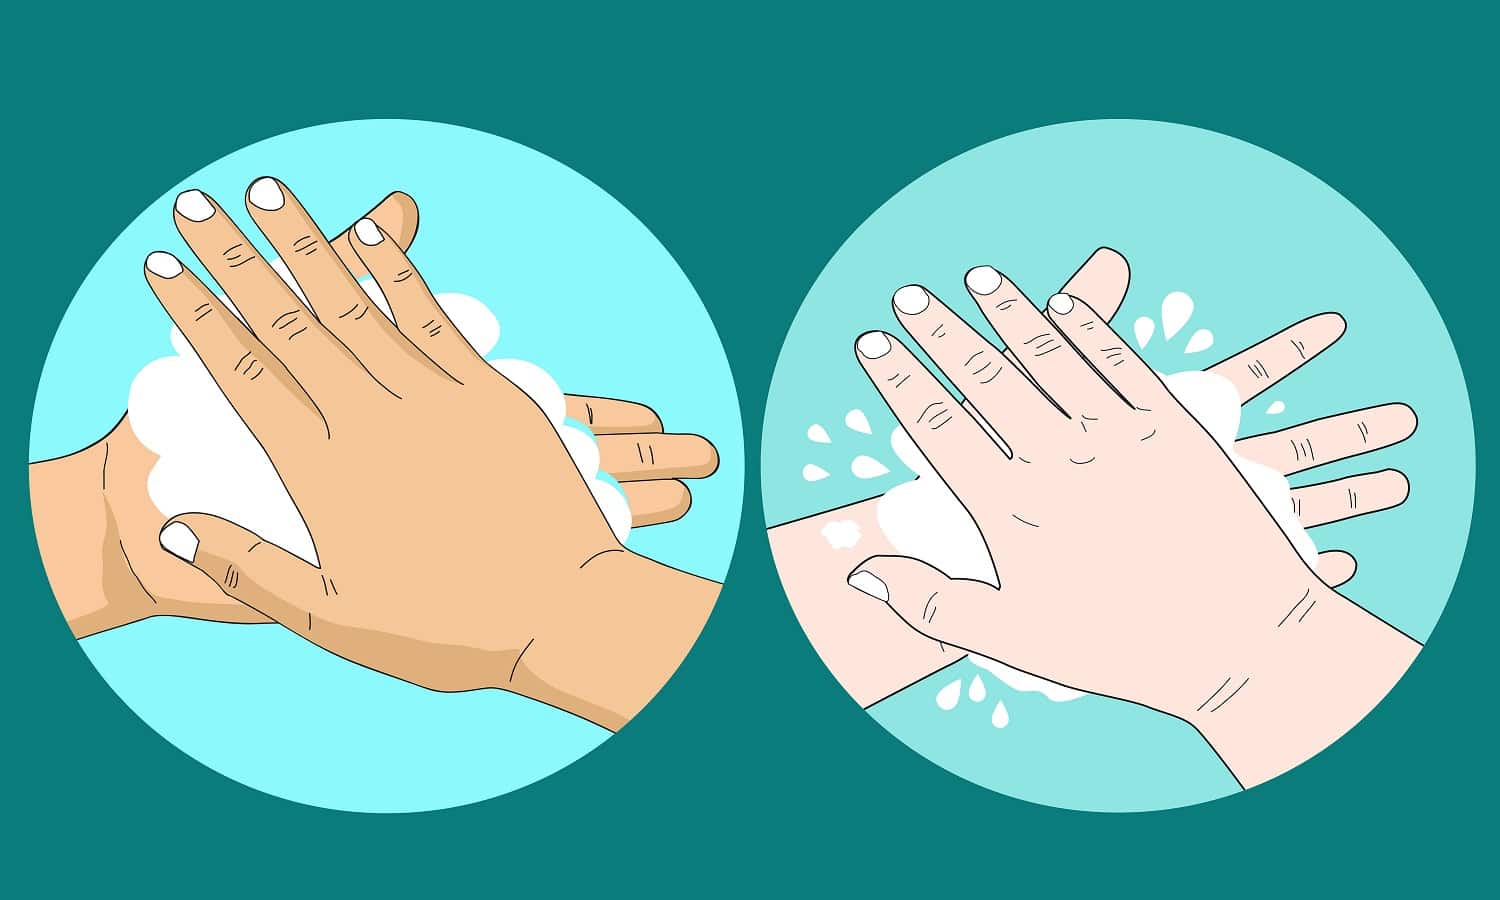 cartoon doodle drawing of people washing hand with soap and bubble, Body cleaning concept to prevent germs and illness.